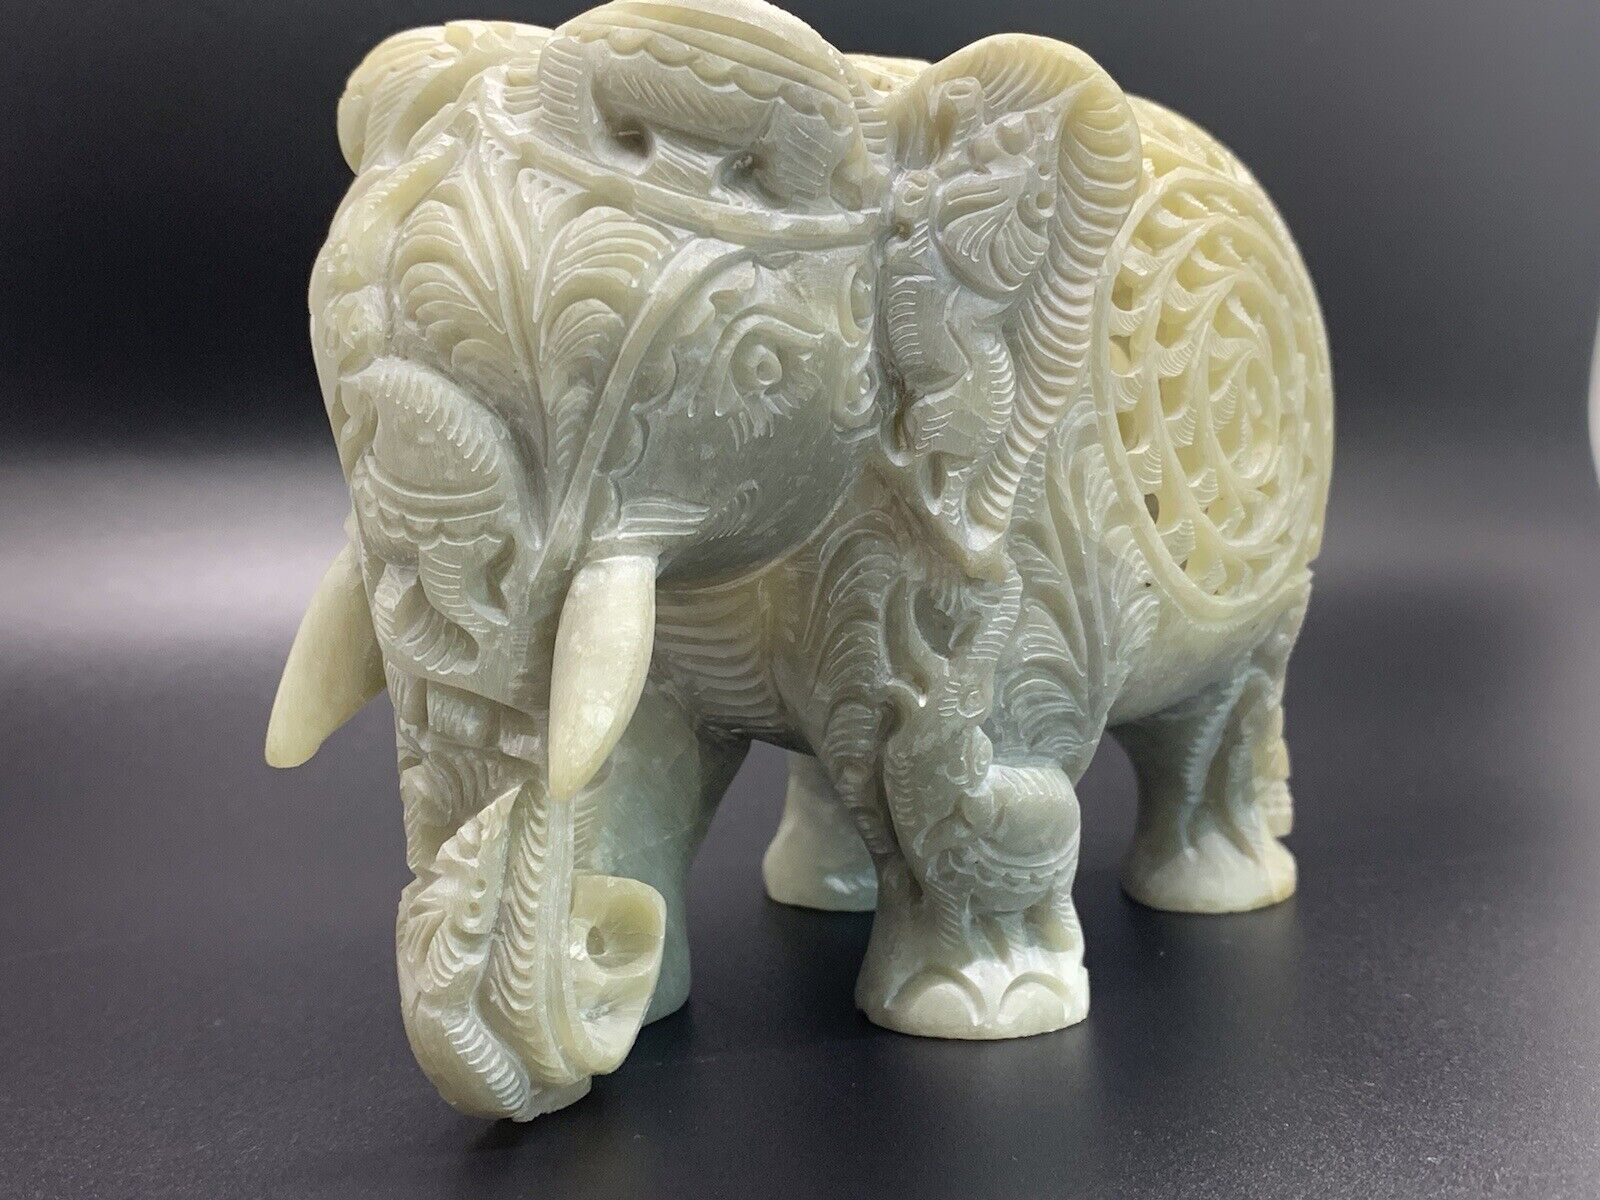 Large Exquisite Pregnant Elephant Carving, Stunning Detail And Craftsmanship.